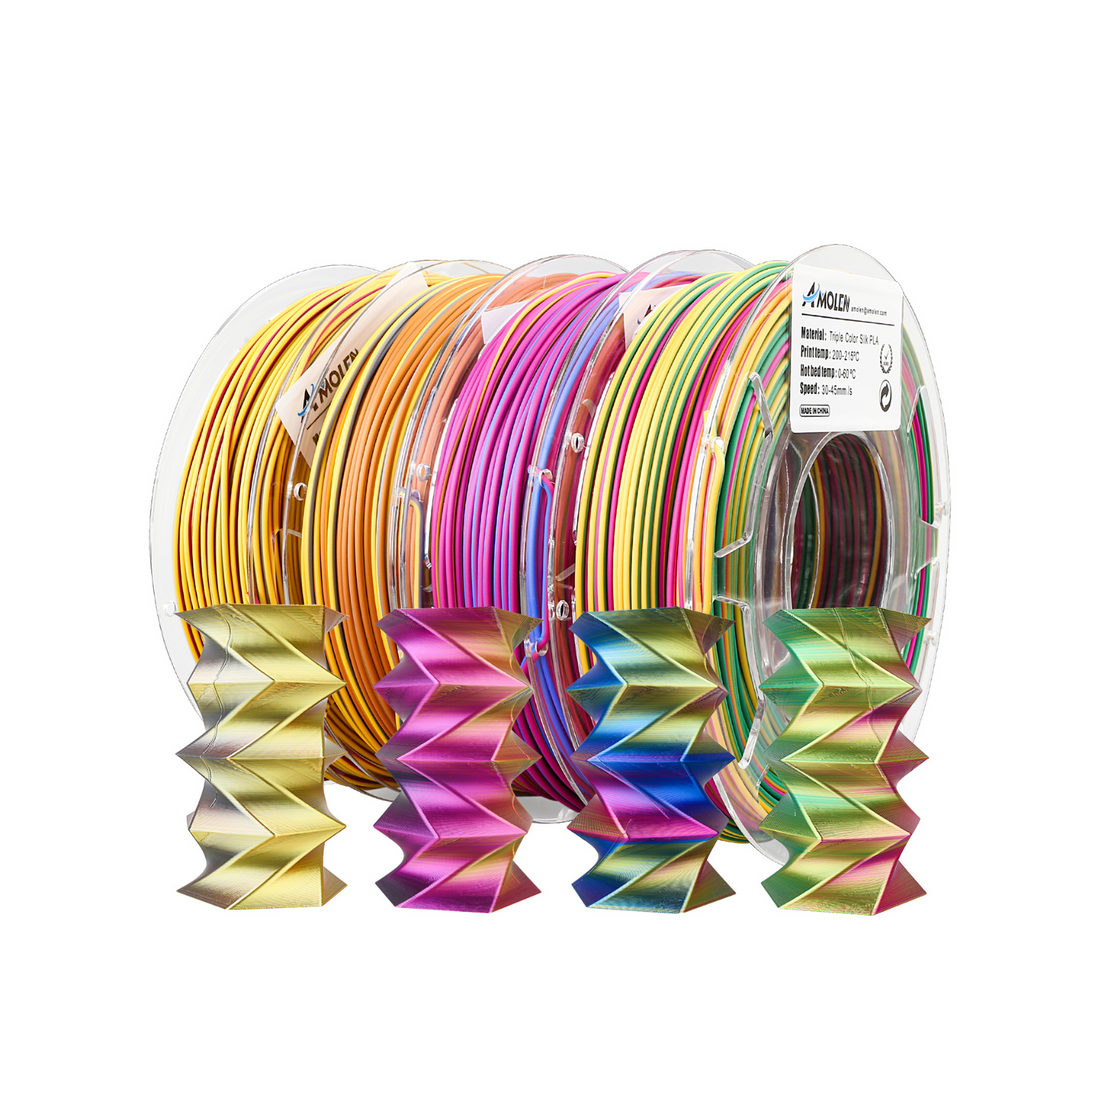 Silk Triple Color PLA-VARIETY PACK, 200g*4, 1.75MM